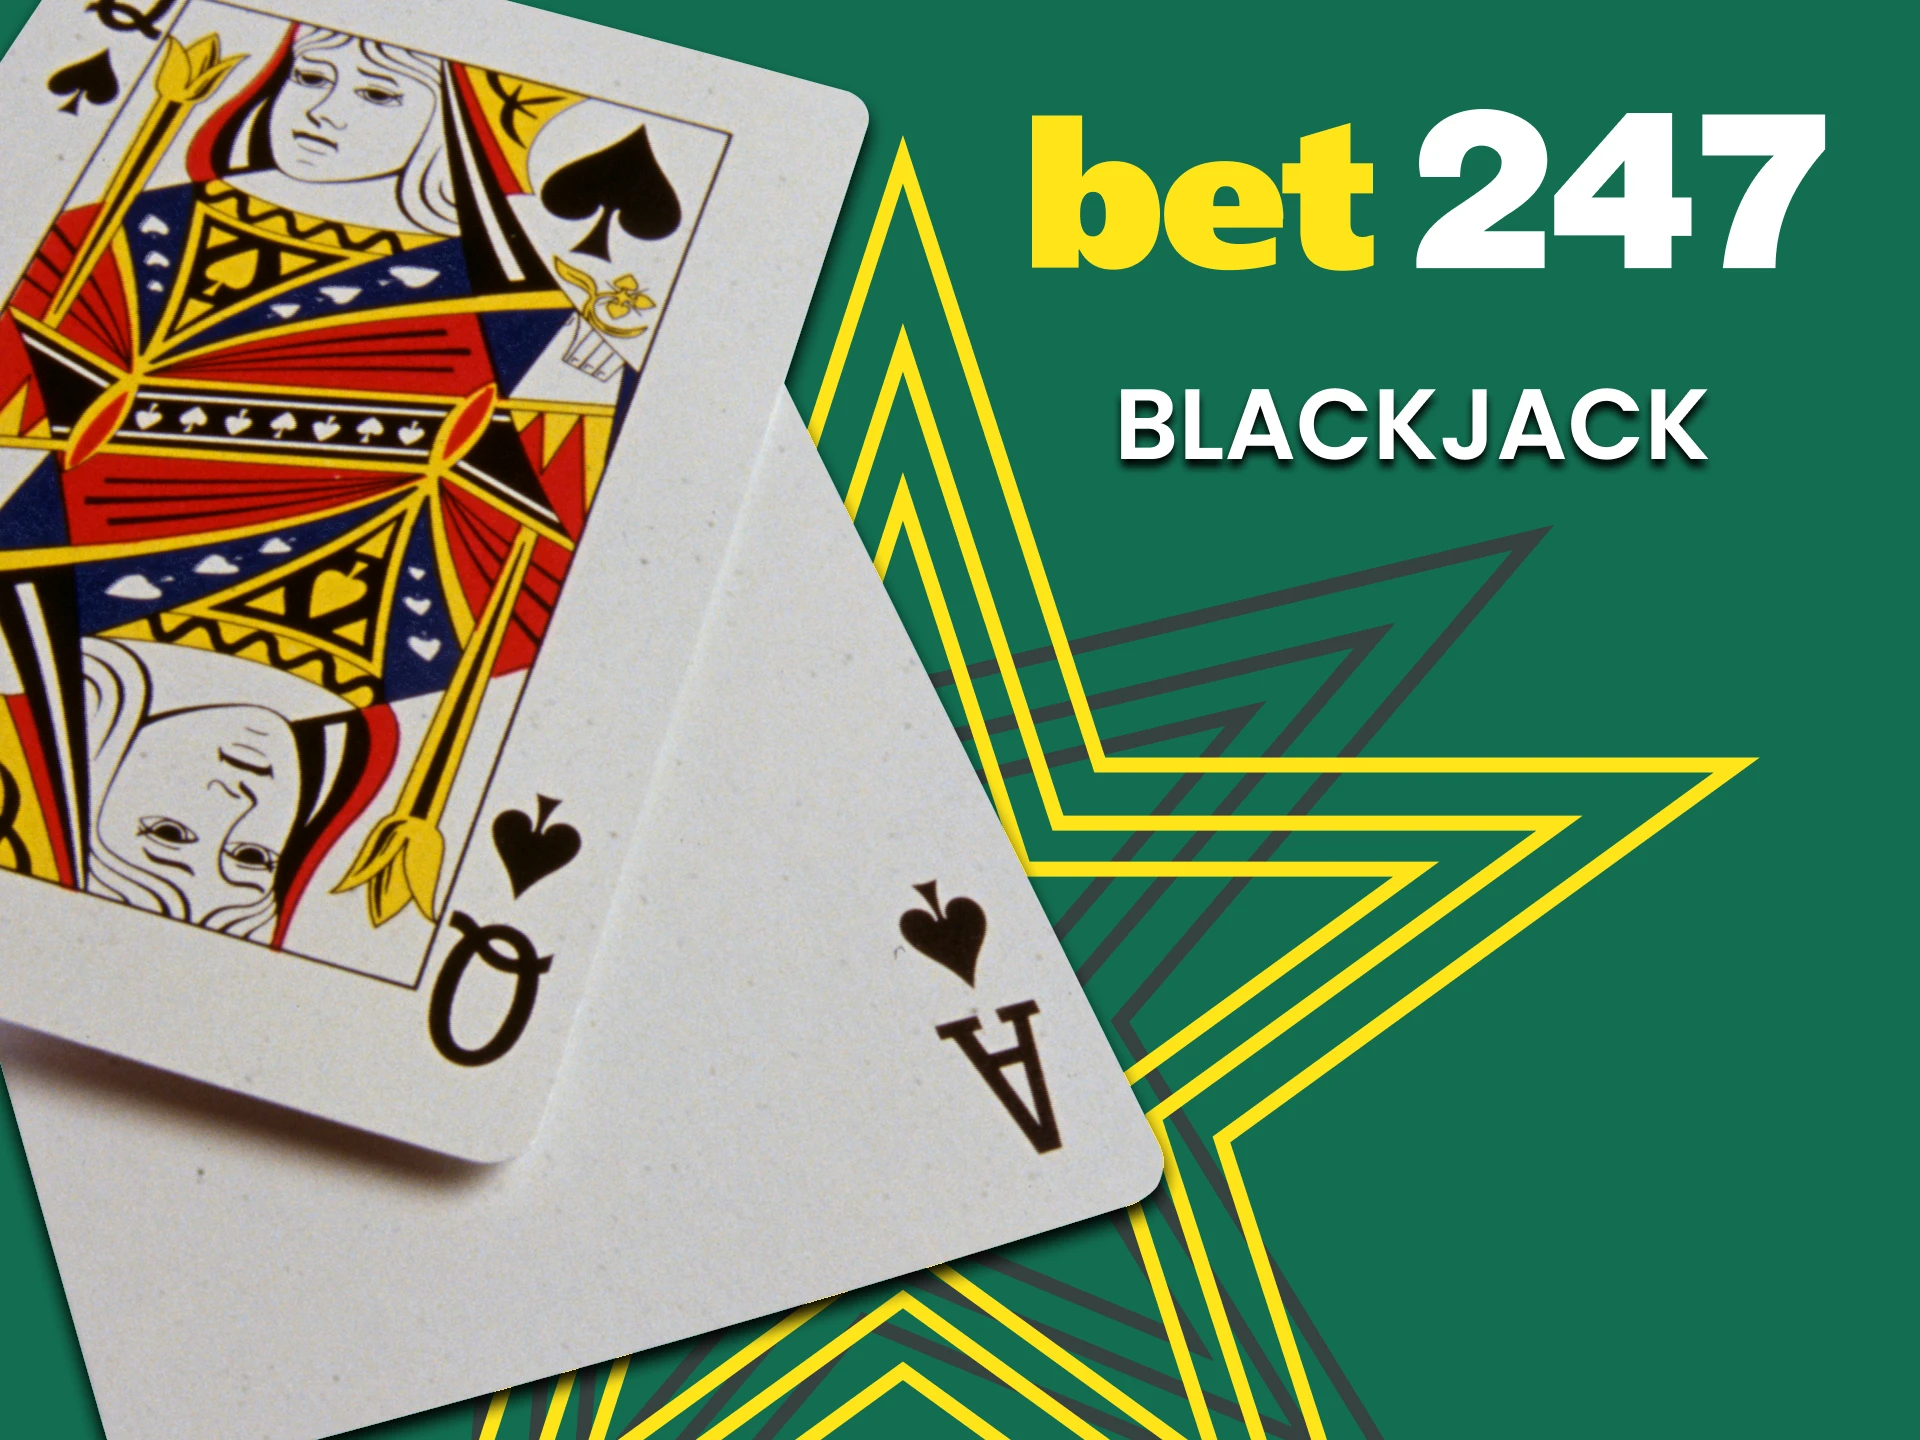 Play blackjack with Bet247.